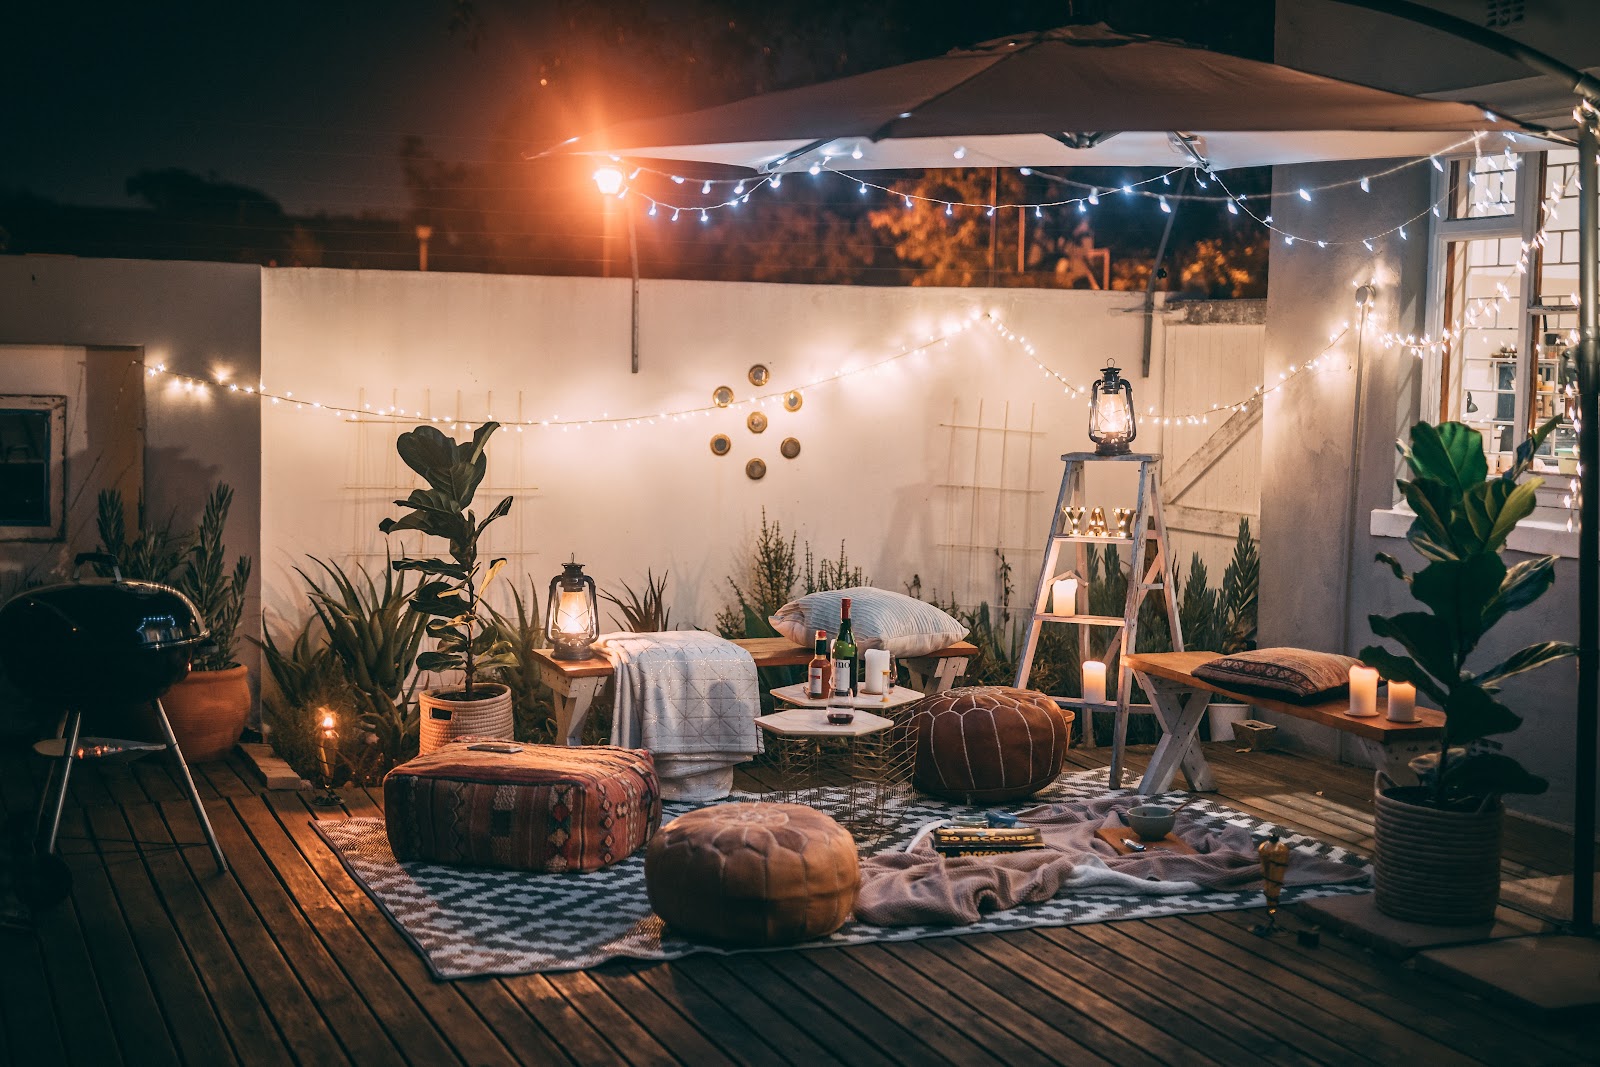 How to Plan the Perfect Date Night